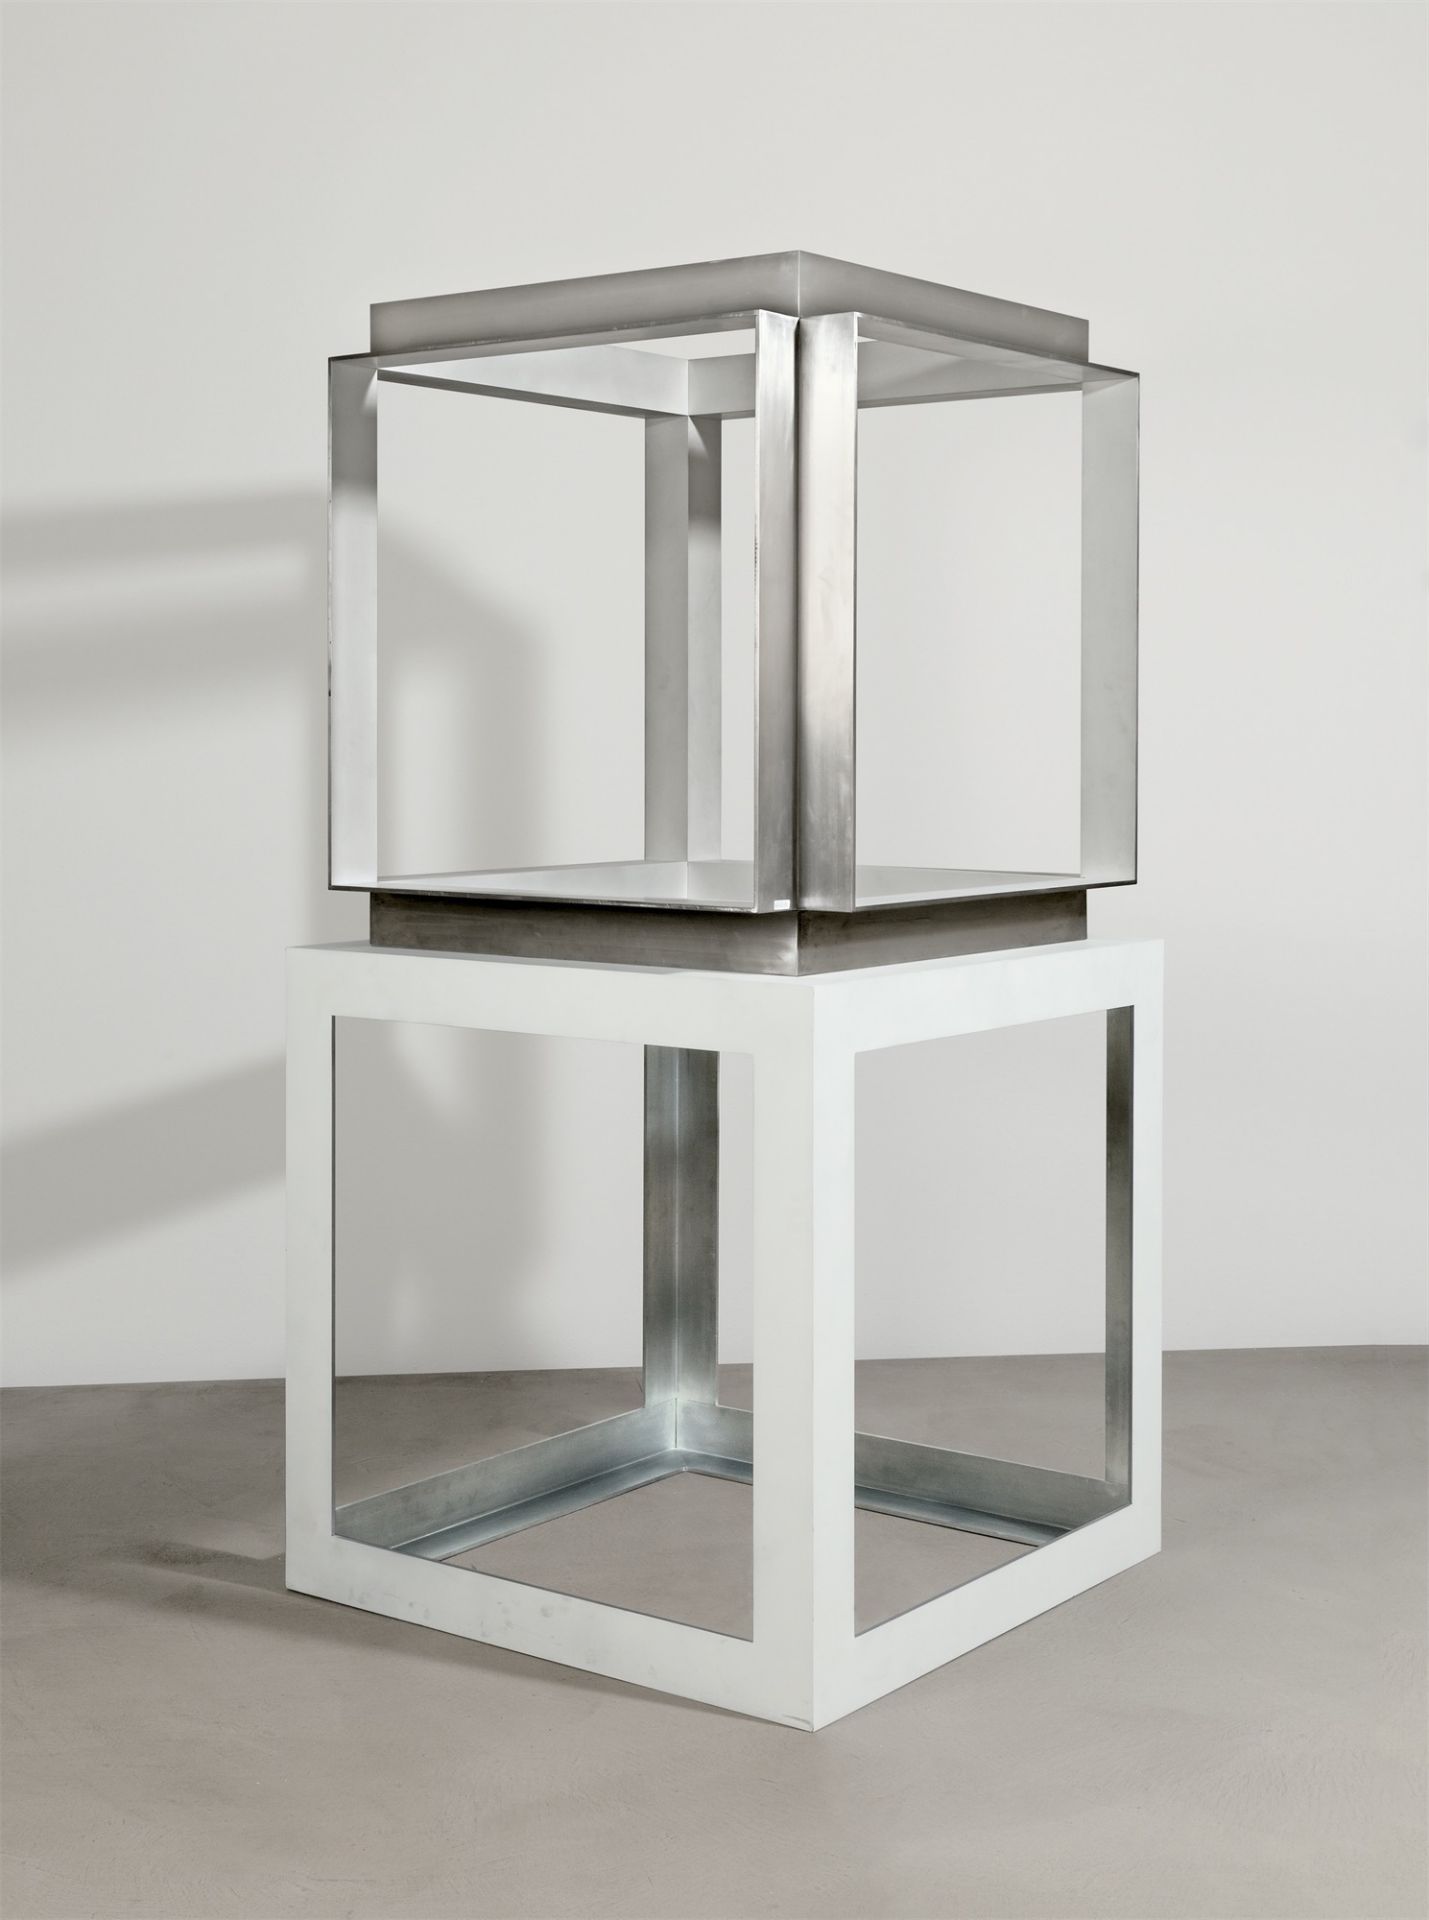 Jonathan Monk. Complete Incomplete Open Cube. 2007